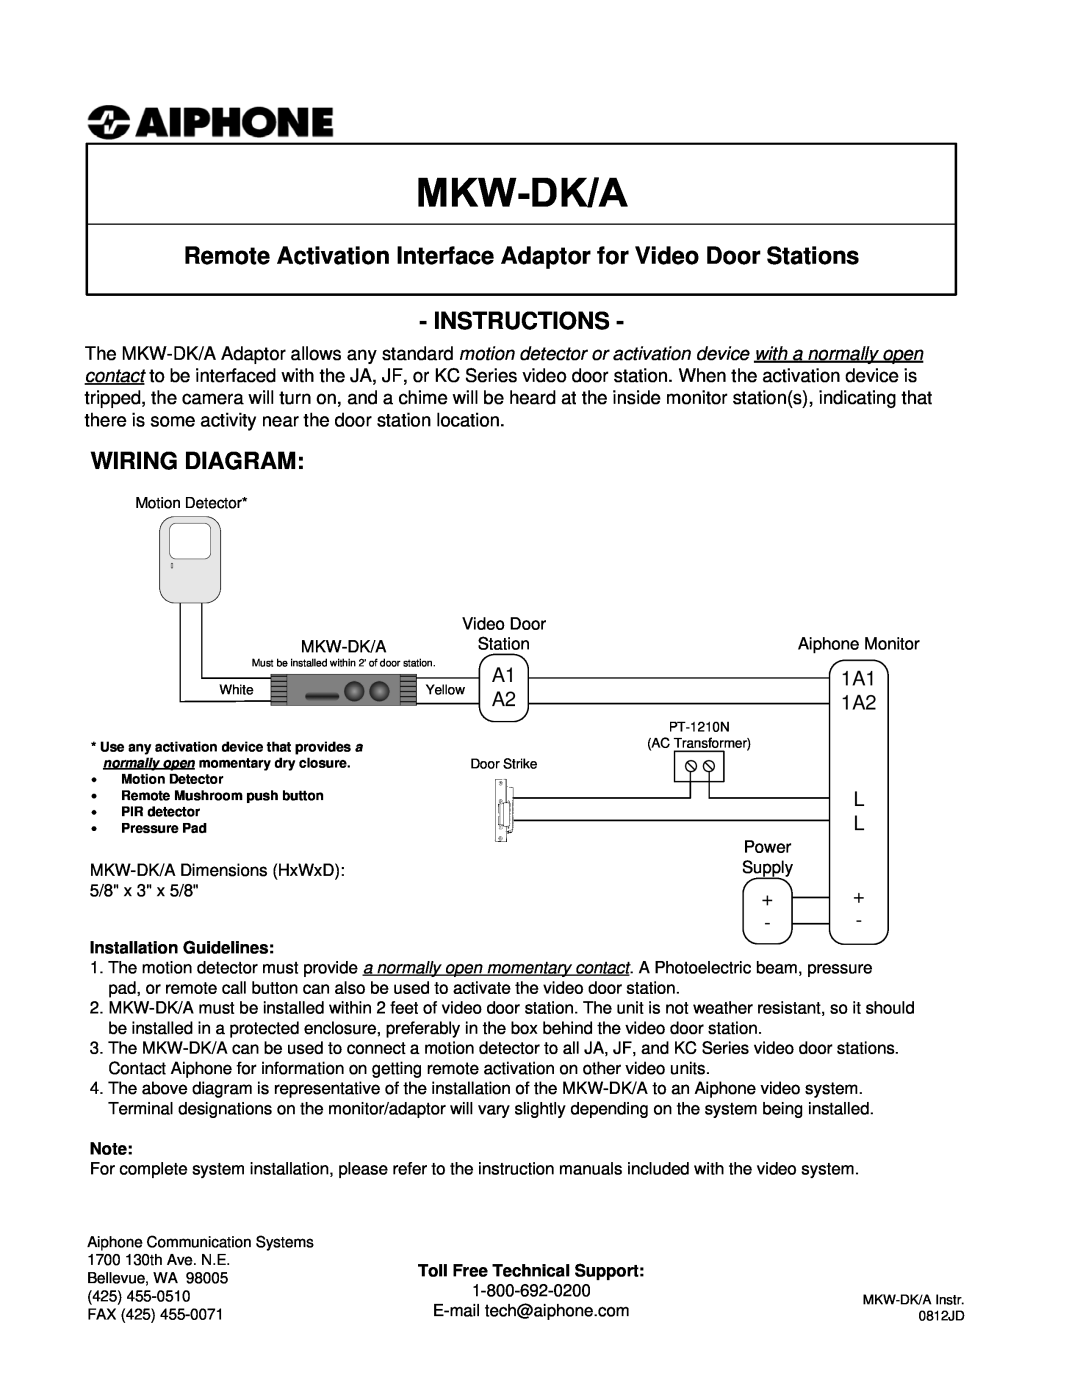 Aiphone MKW-DK/A instruction manual Instructions, Wiring Diagram, Installation Guidelines 